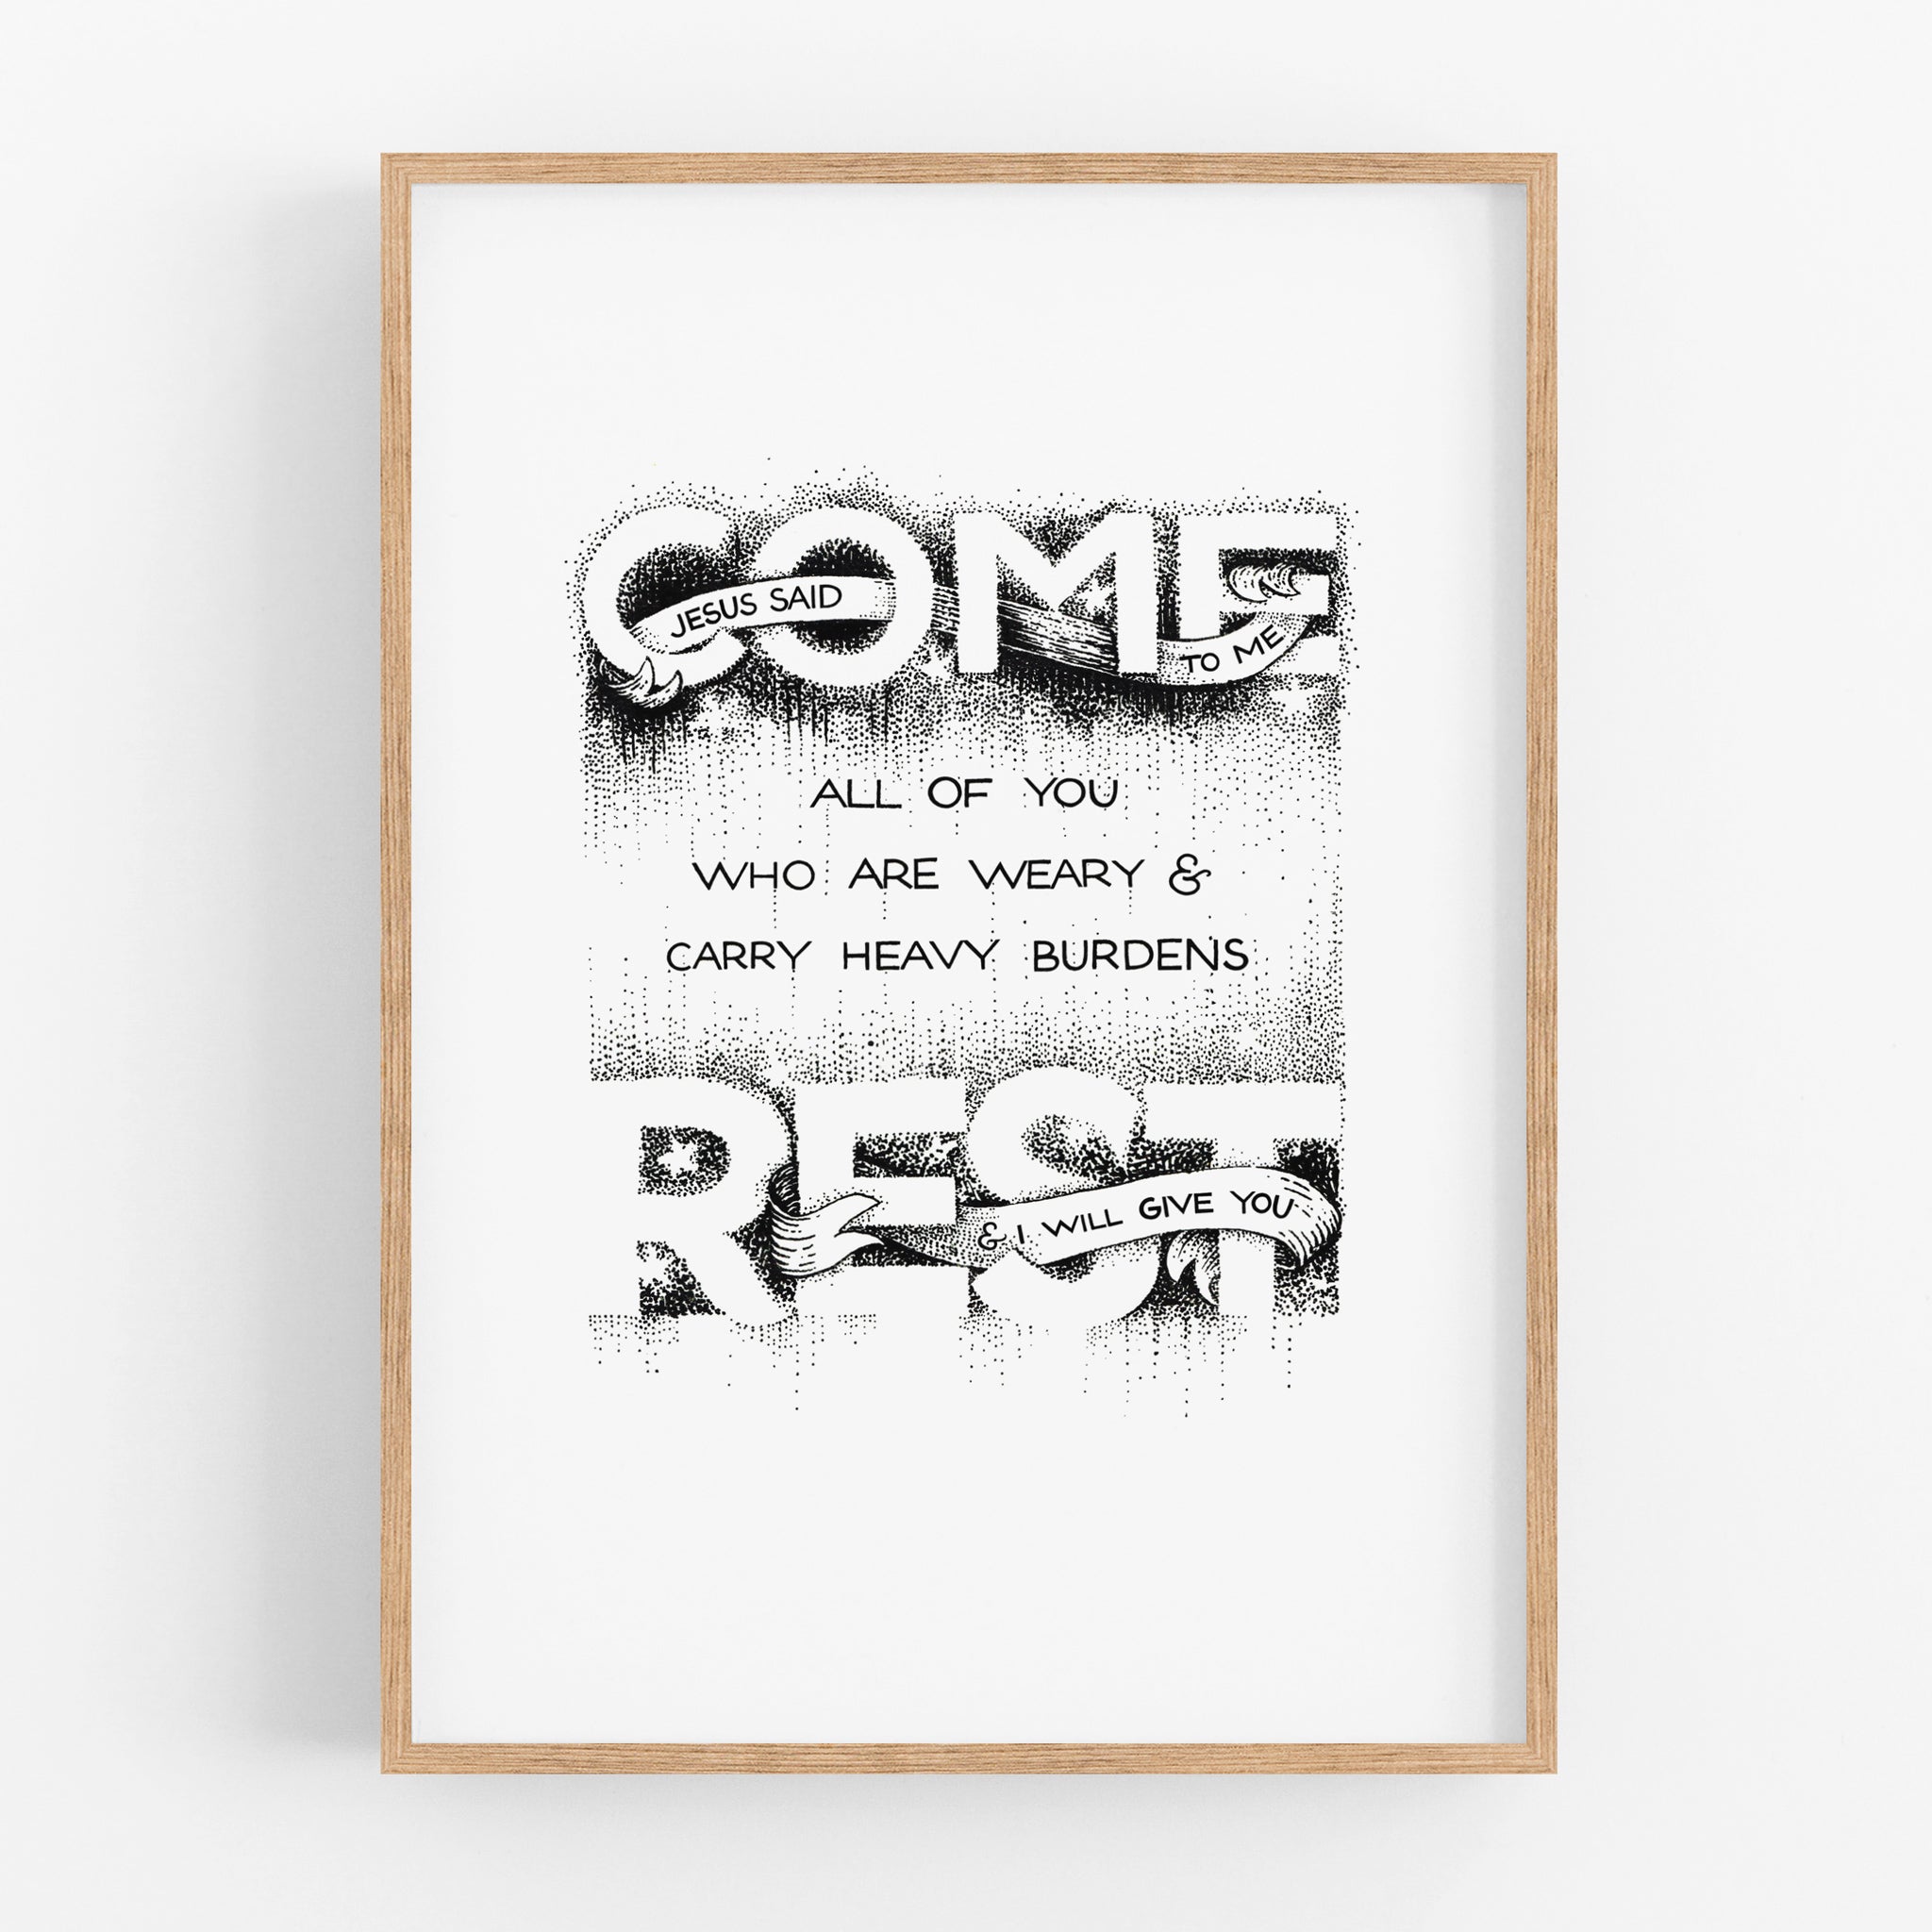 Come and Rest - Matthew 11:28 art print A4 handlettering